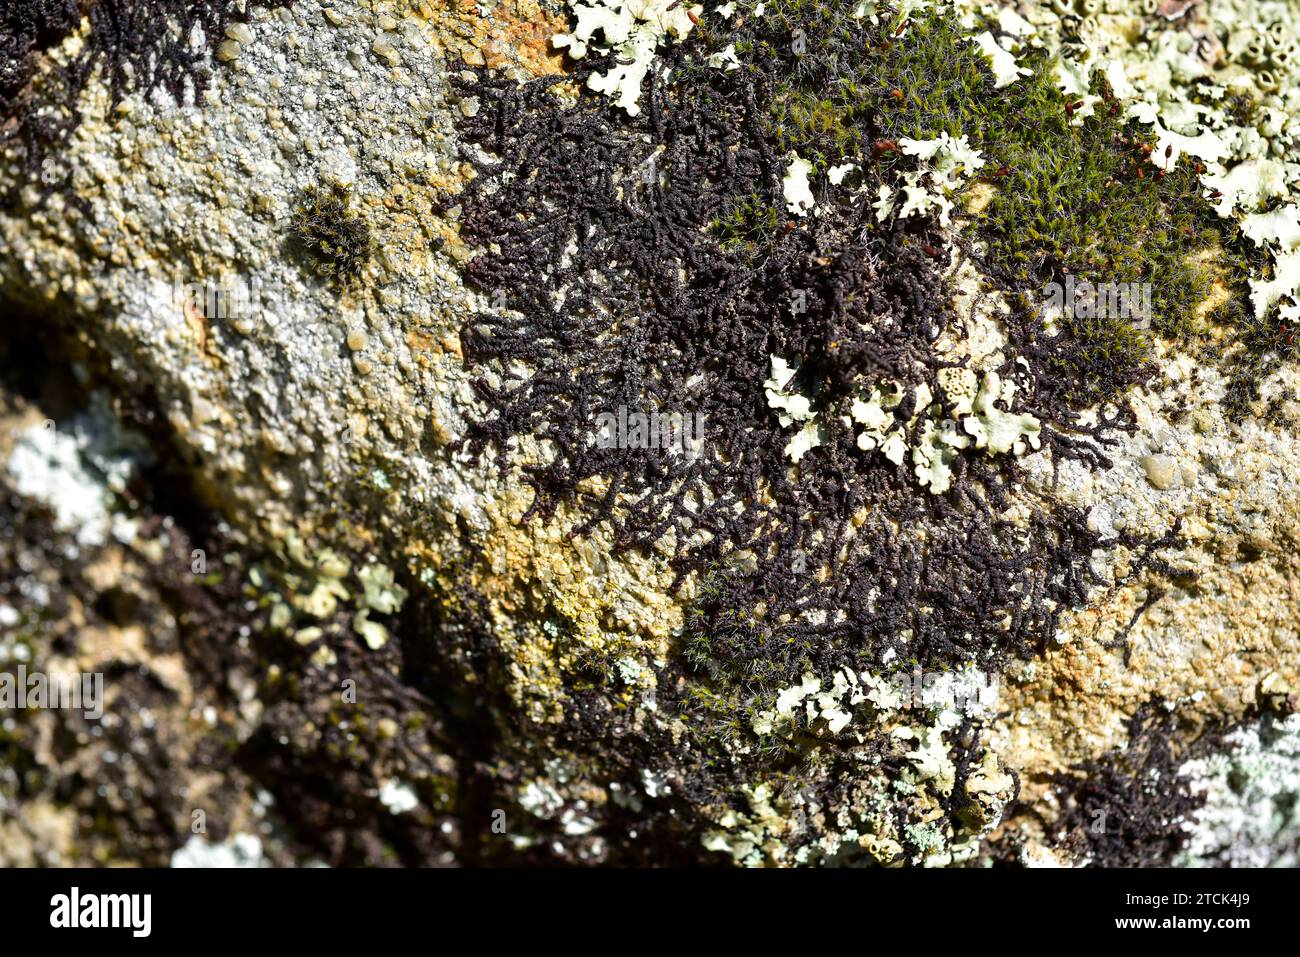 Dilated scalewort (Frullania dilatata) is a species of liverwort. This photo was taken in La Albera, Girona province, Catalonia, Spain. Stock Photo